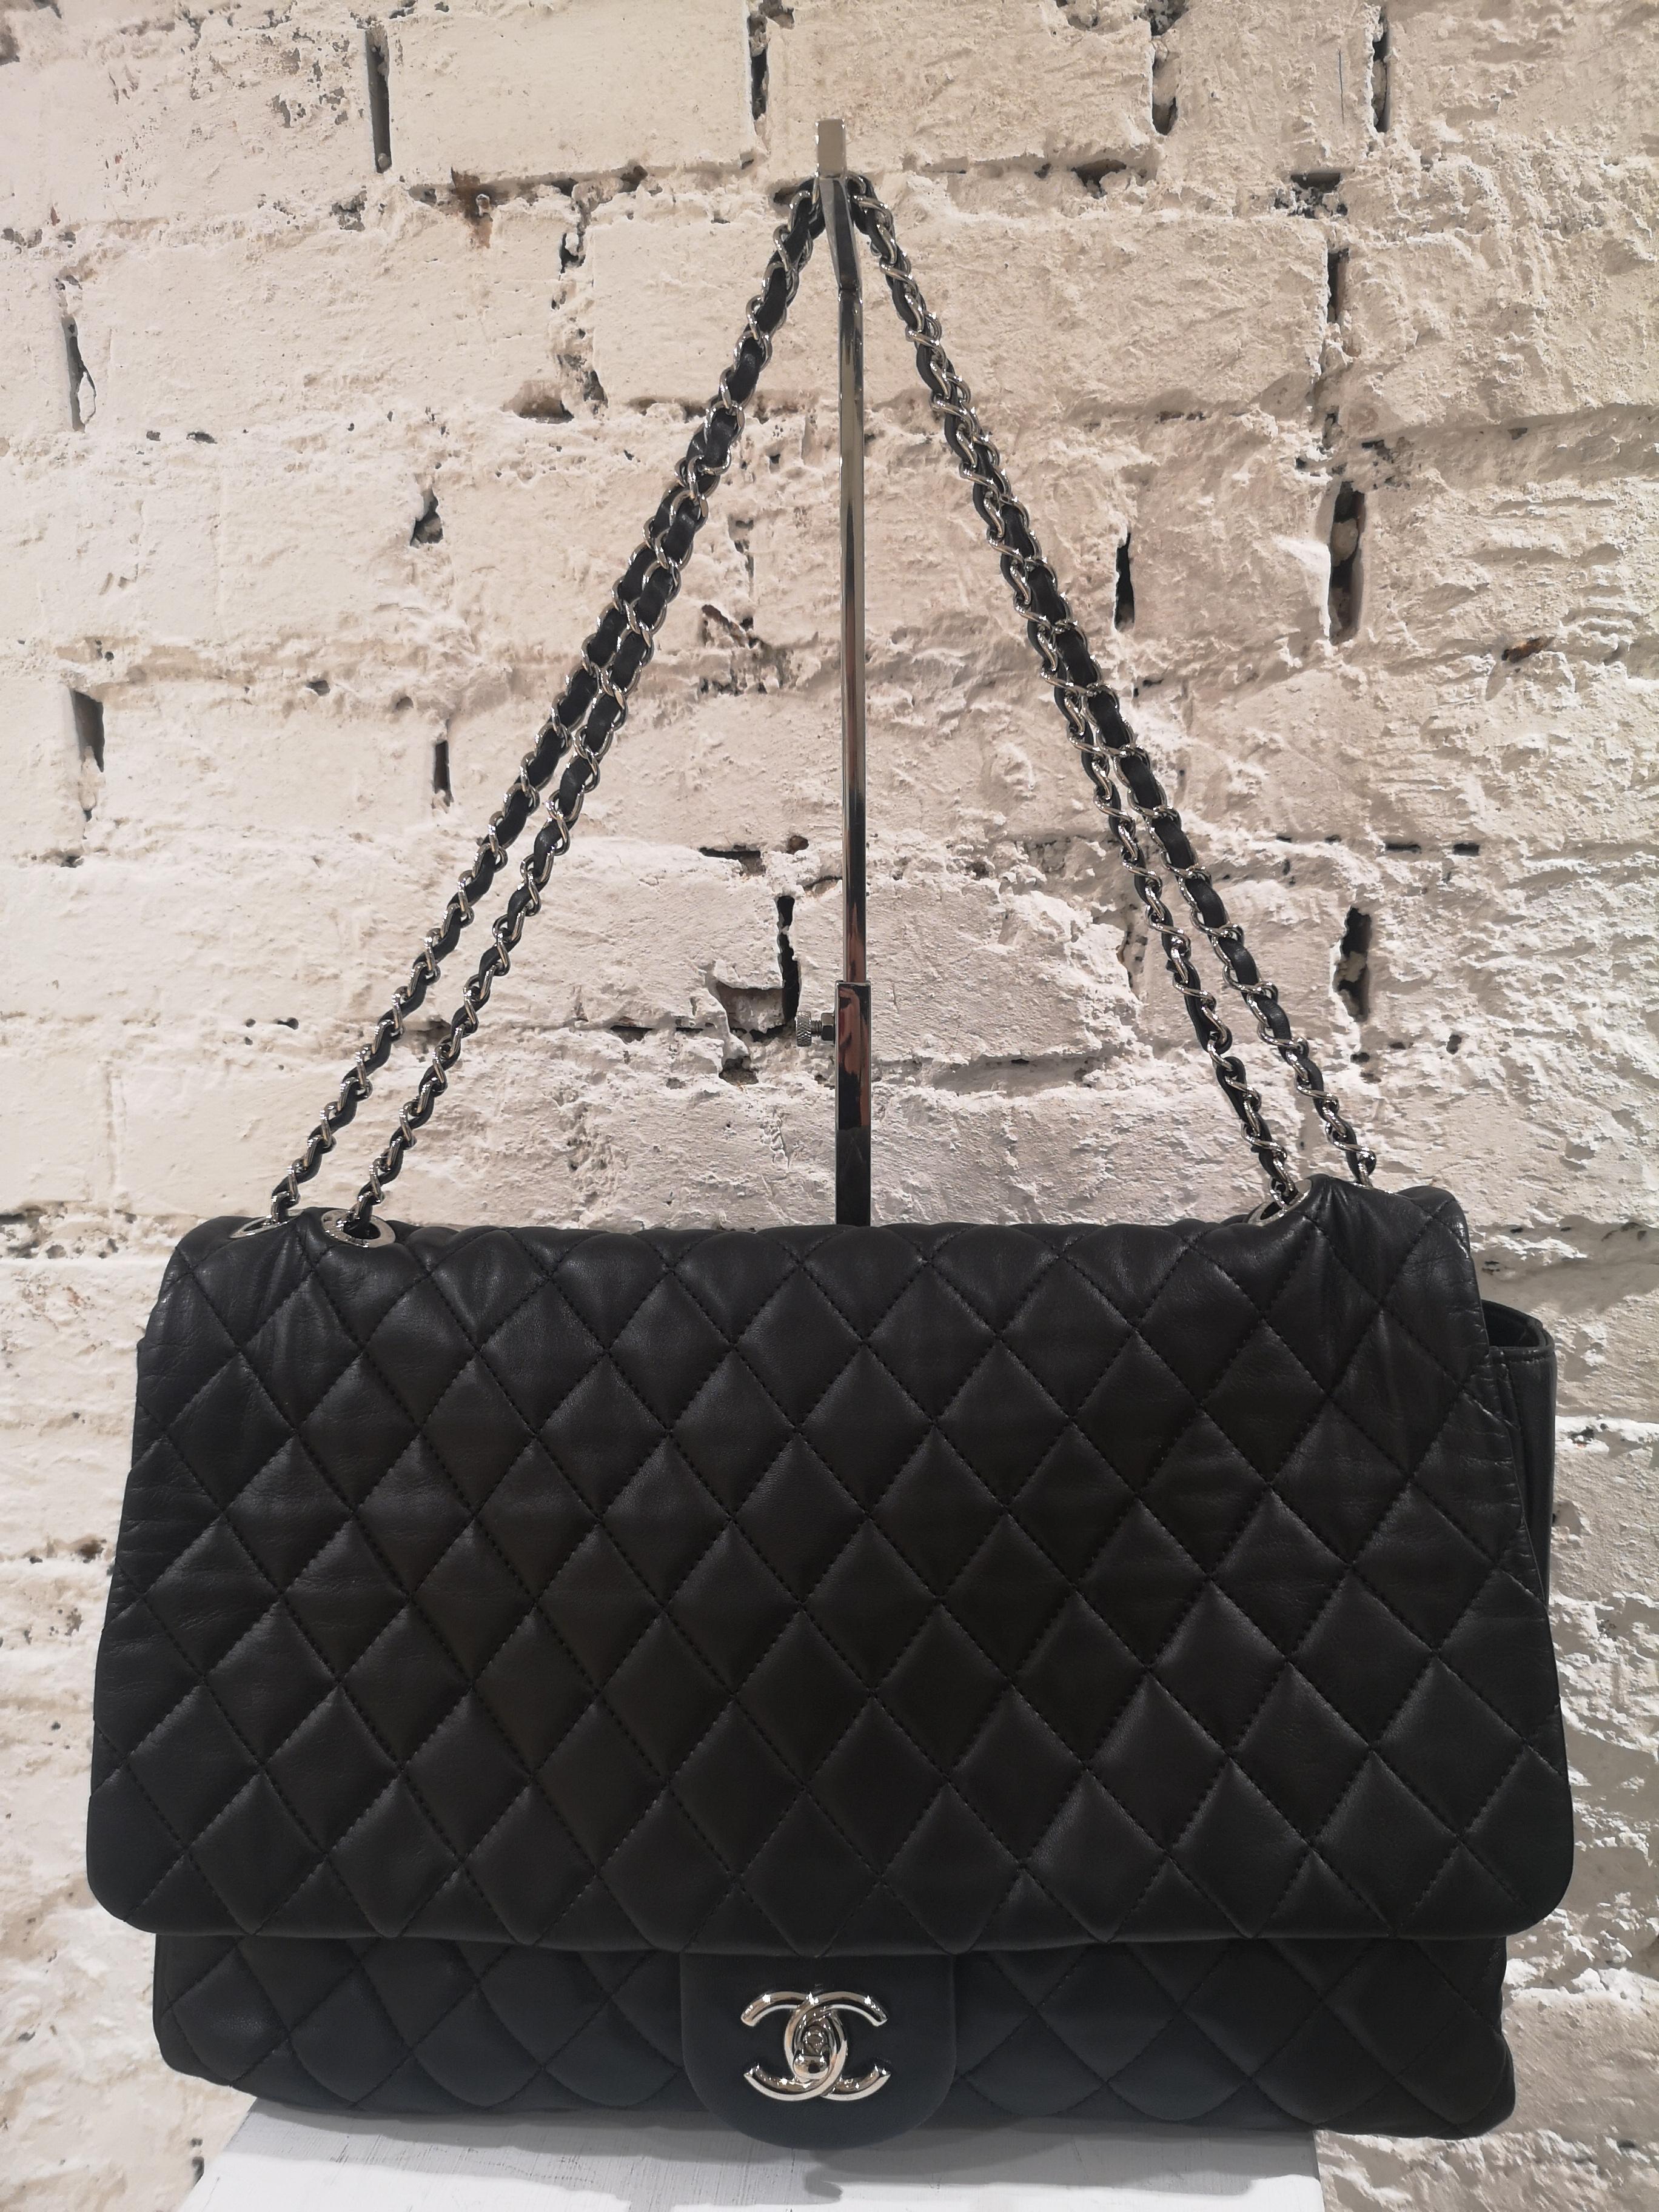 Chanel maxi jumbo black leather shoulder bag
Chanel black leather silver tone hardware CC logo on the front totally made in Italy shoulder bag, the back tasks comes with the cover rain guard
measurements: 28 * 38 cm * 10 cm depth